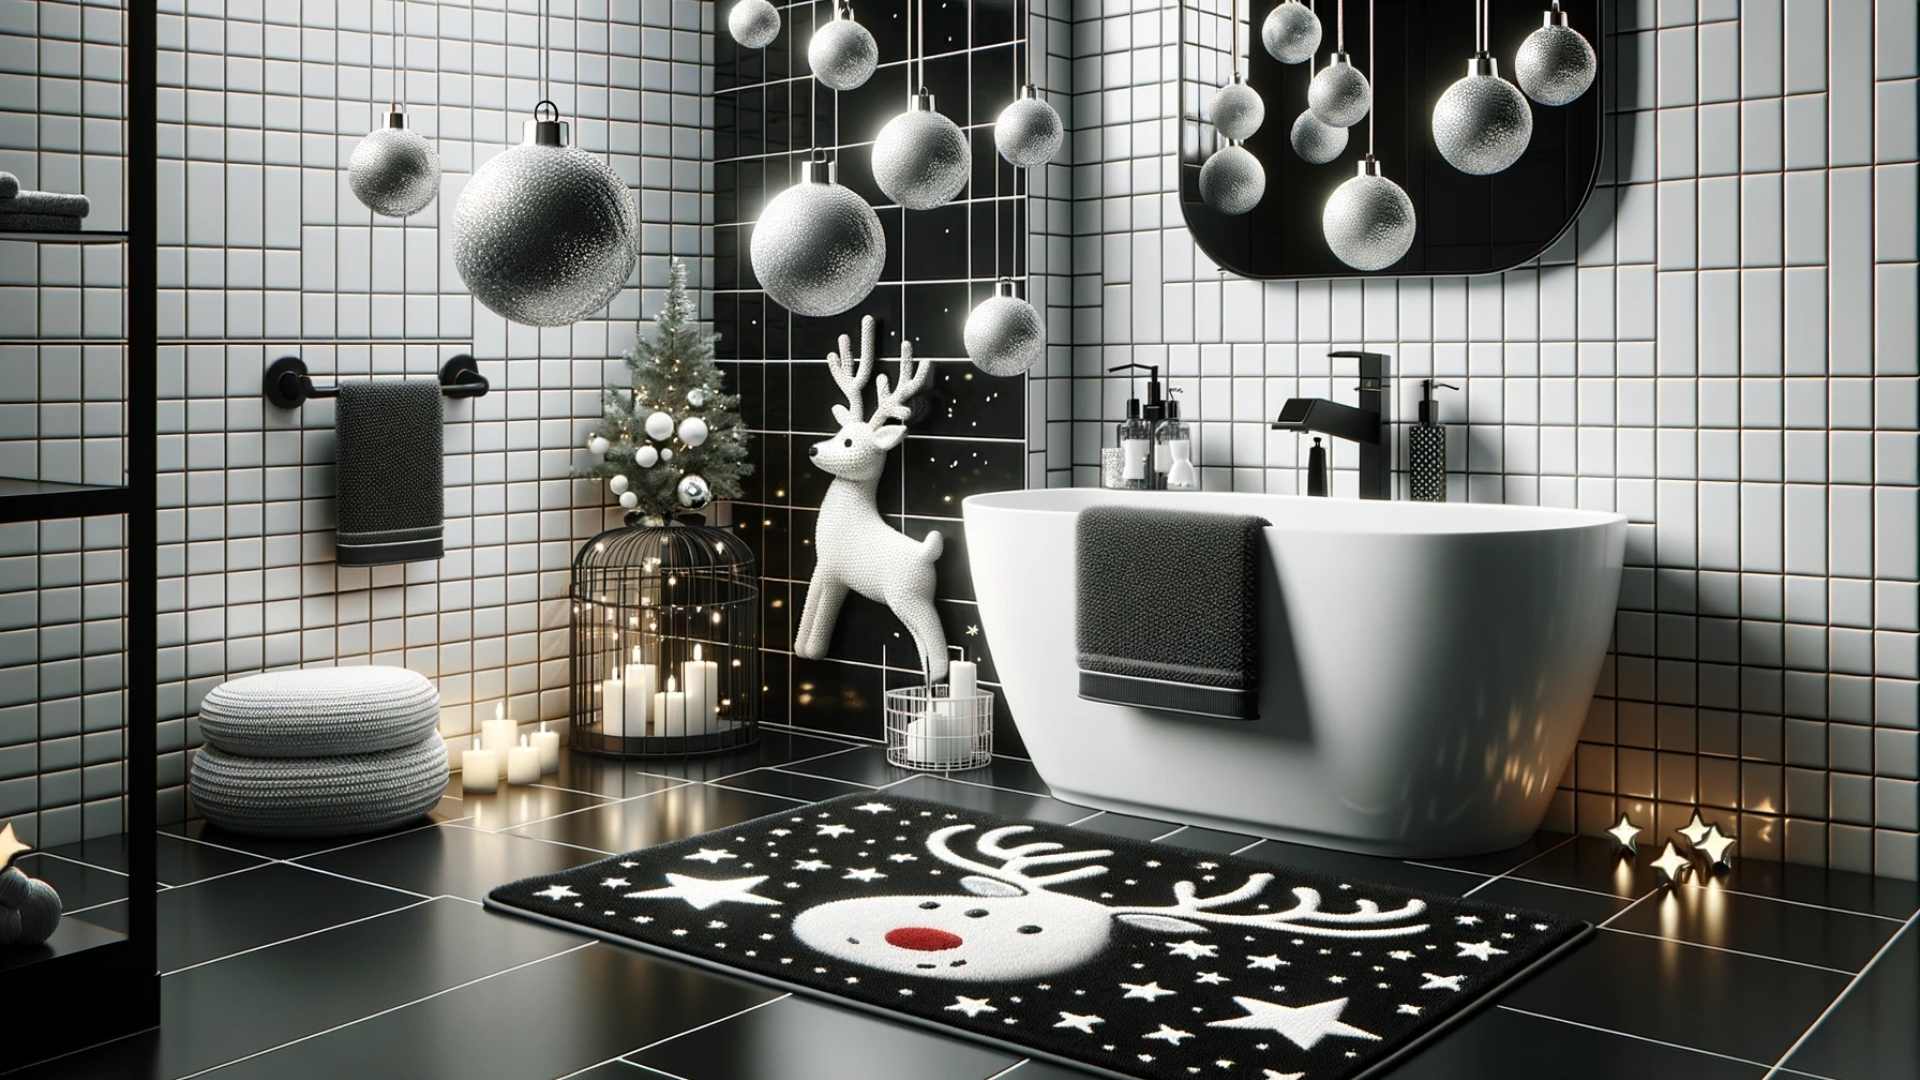 Illustration of a contemporary bathroom with black and white tiles. The room sparkles with hanging Christmas baubles, a reindeer-shaped soap dispenser, and a festive bath mat with stars and bells design.